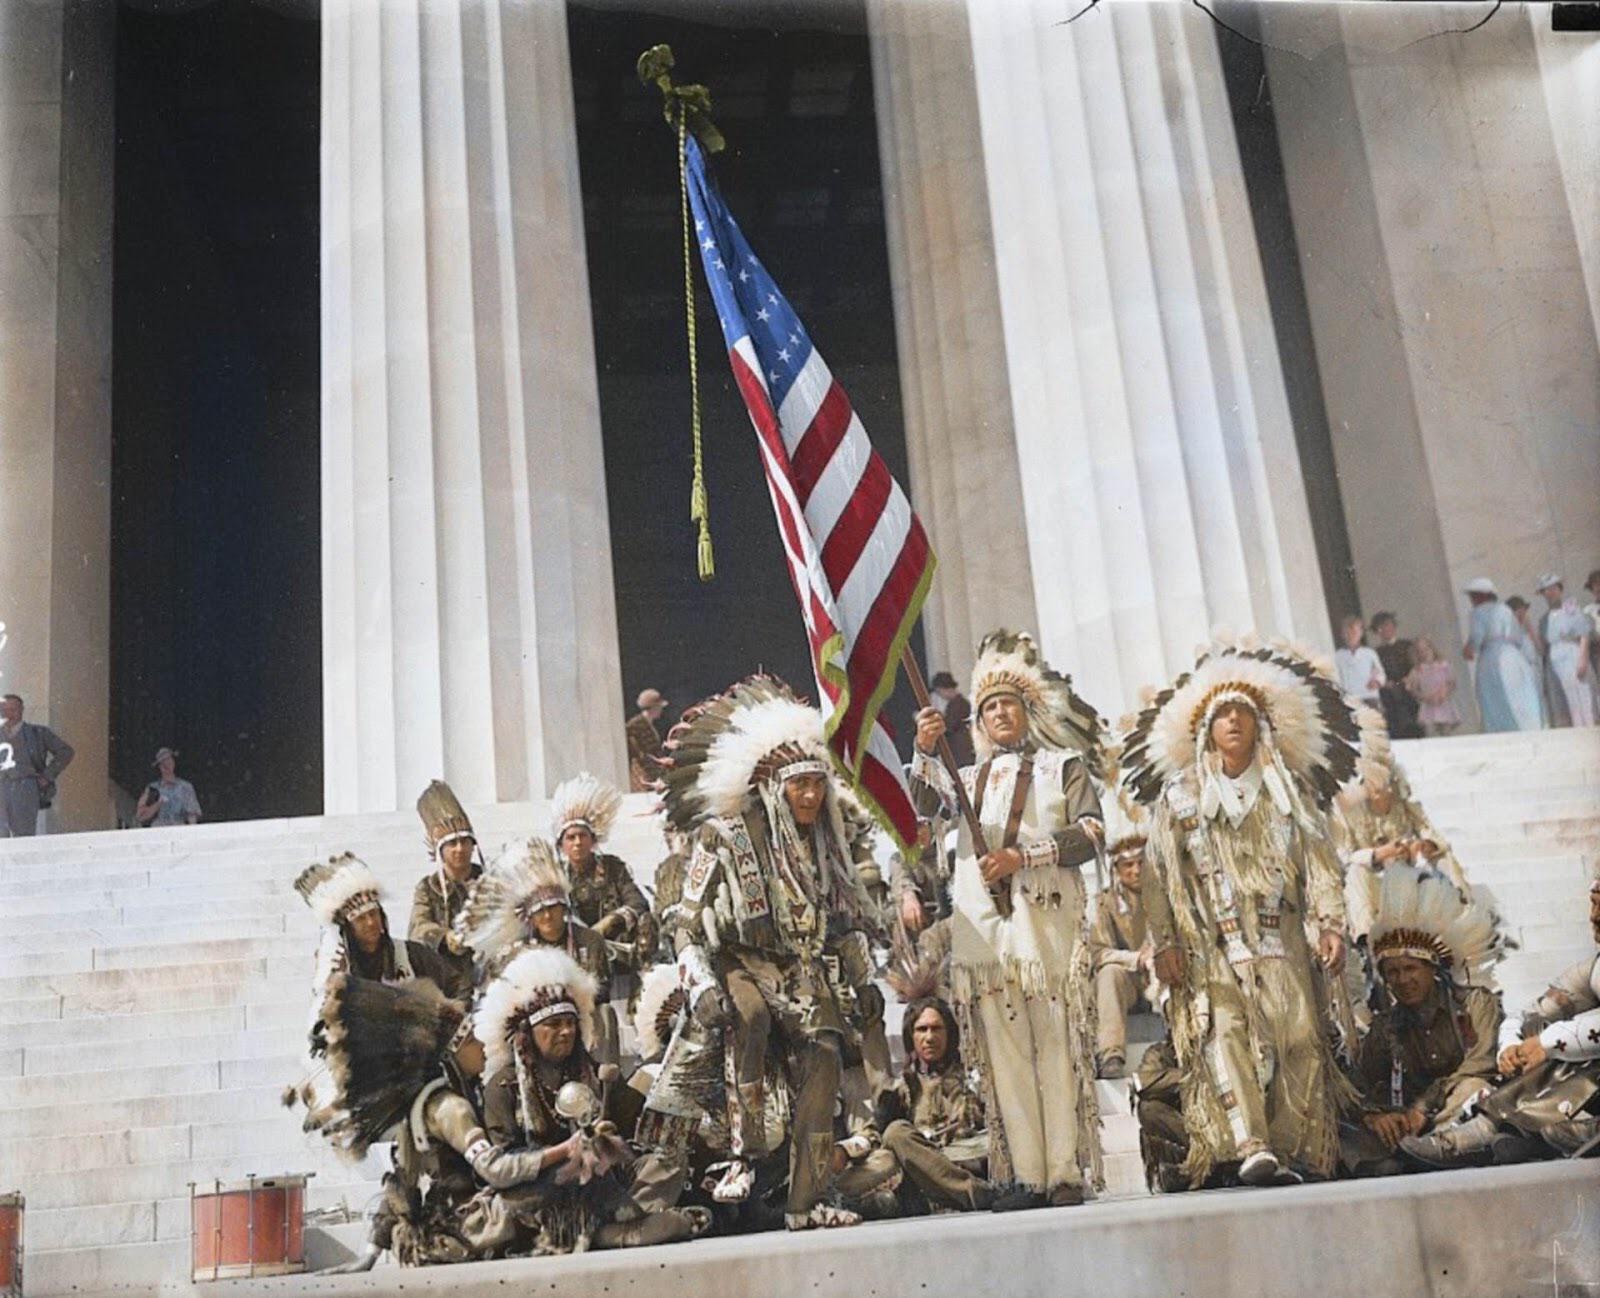 1936. Native American men wearing their traditional attire while raising the Stars and Stripes at the Lincoln Memorial. 12 years after President Calvin Coolidge granted them US citizenship.jpg